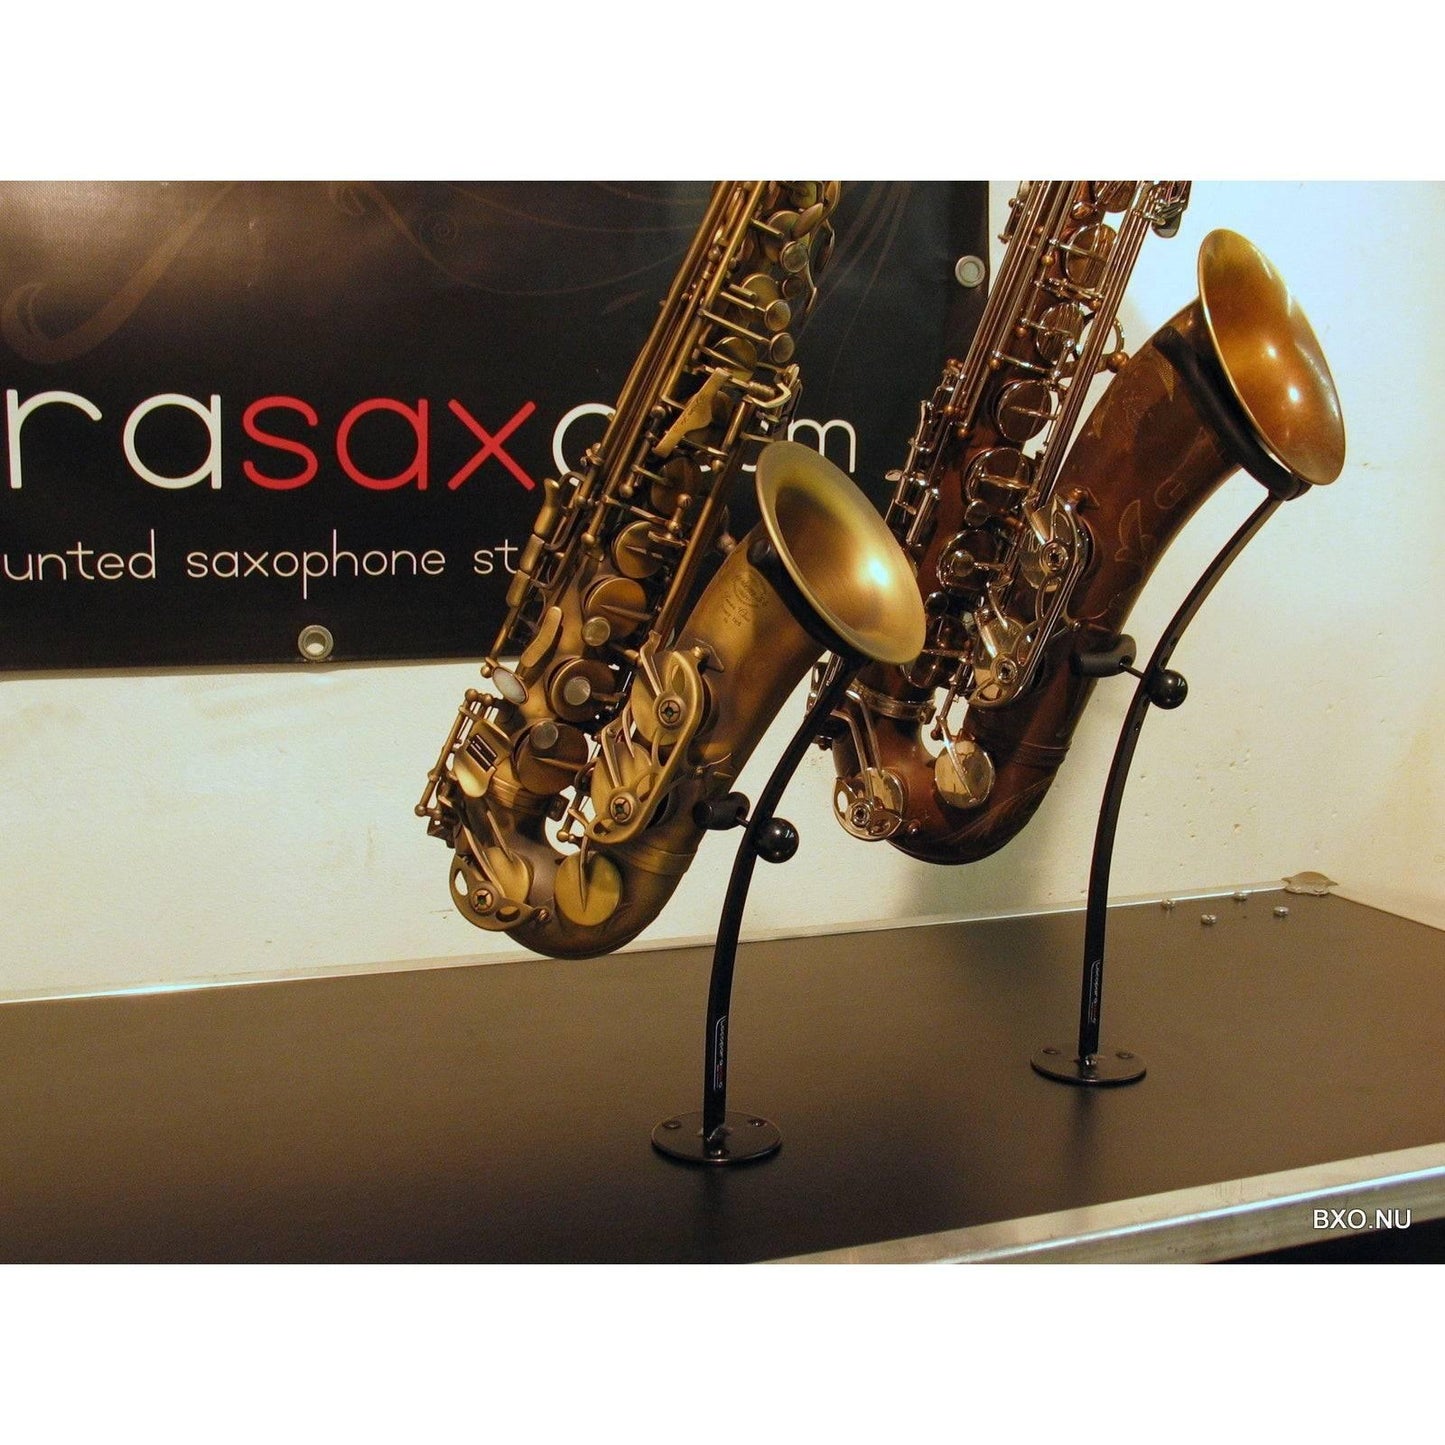 trade show pic of 2 desktop saxophones in a stand designed for exhibits and playing rooms by Locoparasaxo 